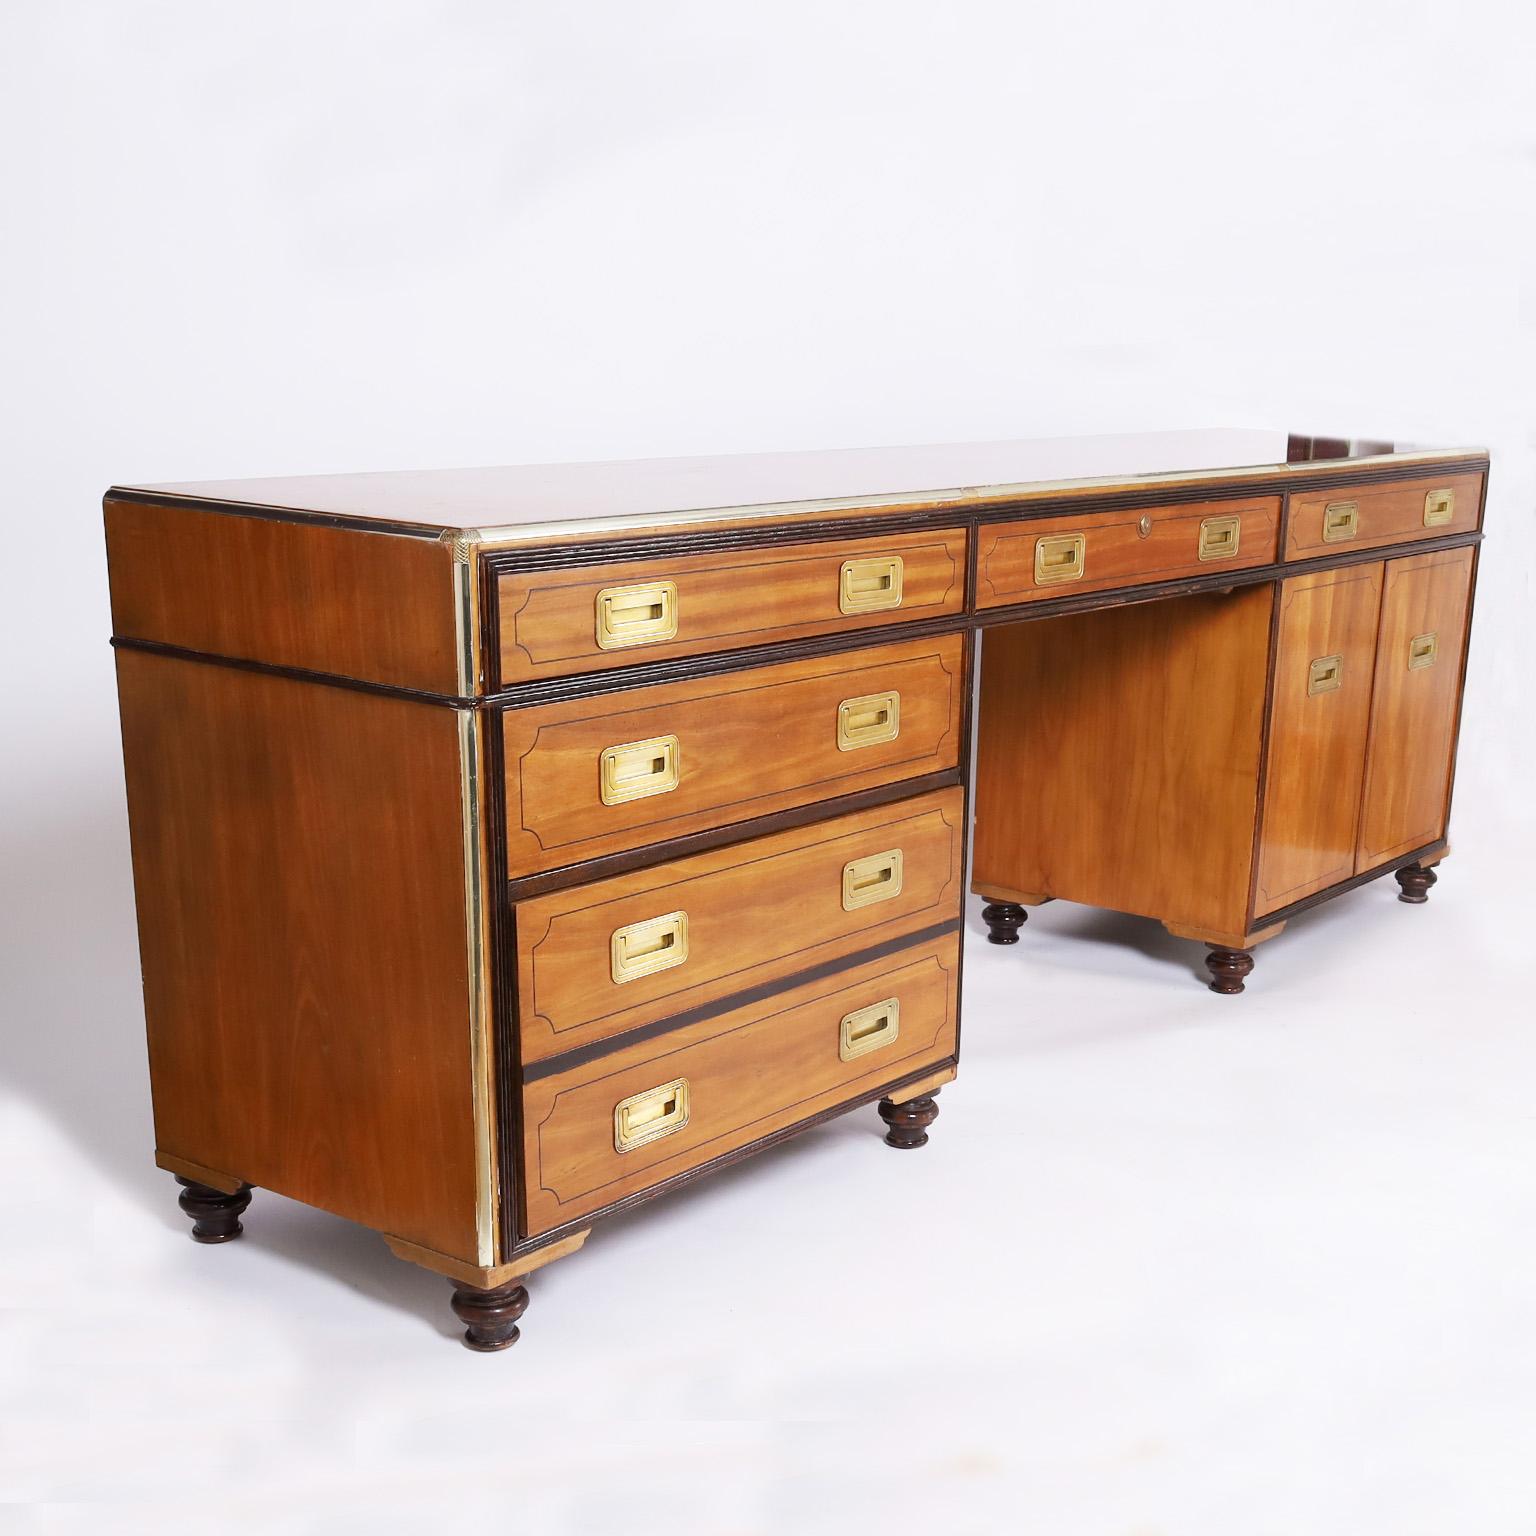 Standout vintage desk or credenza crafted in mahogany and satinwood with multiple components having a wide profile with four drawers on one side and a cabinet with two shelves on the other, campaign style hardware, and turned feet. Signed Baker